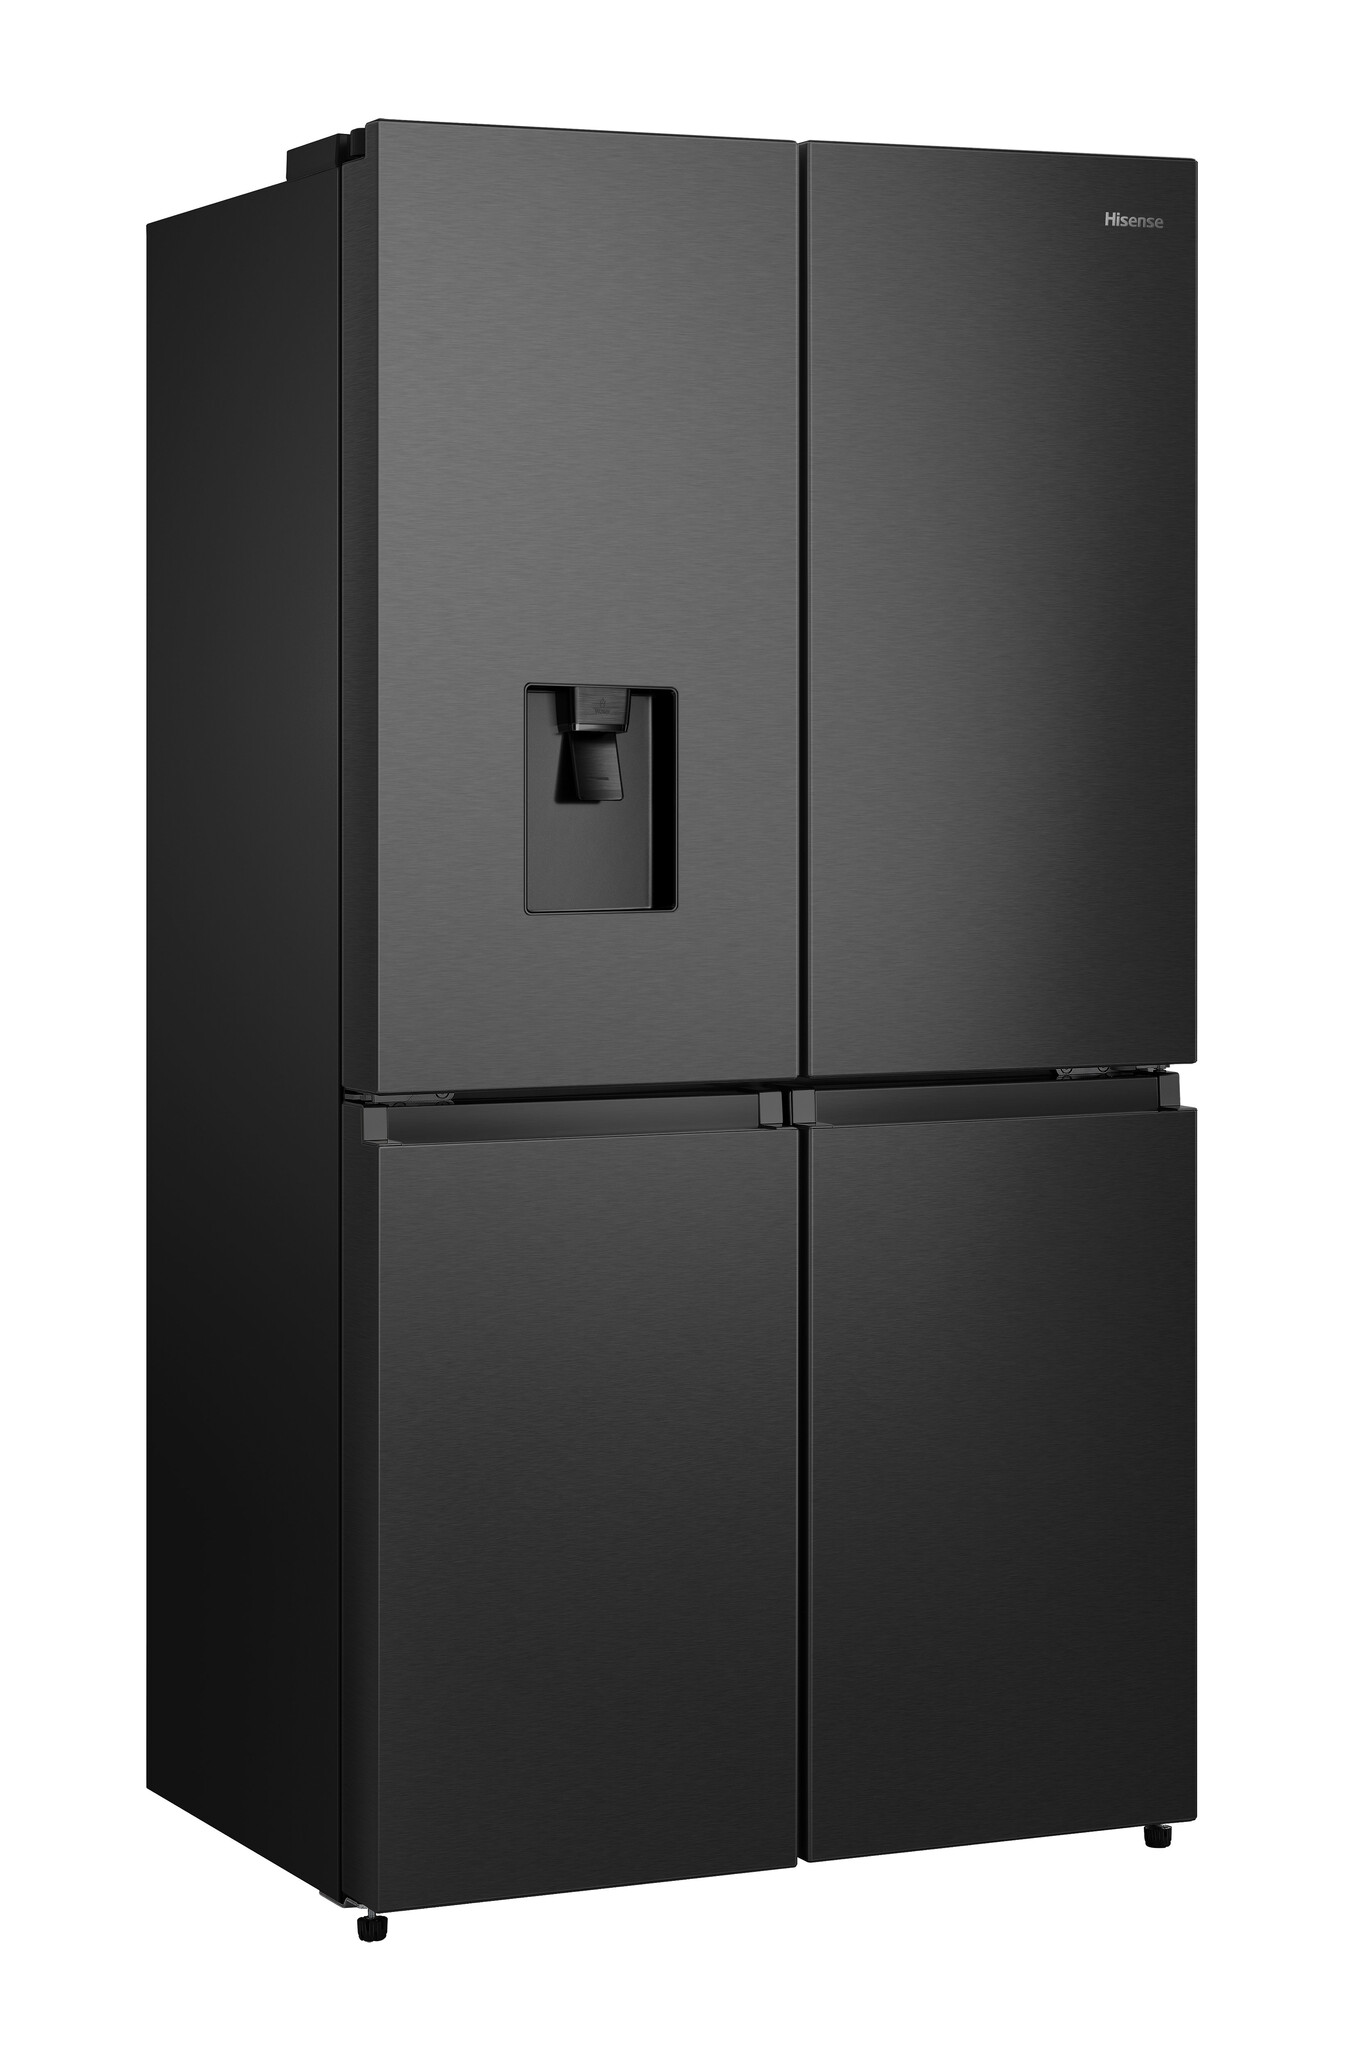 Hisense RQ758N4SWFE Wifi Connected Total No Frost American Fridge Freezer – Black – E Rated #367158